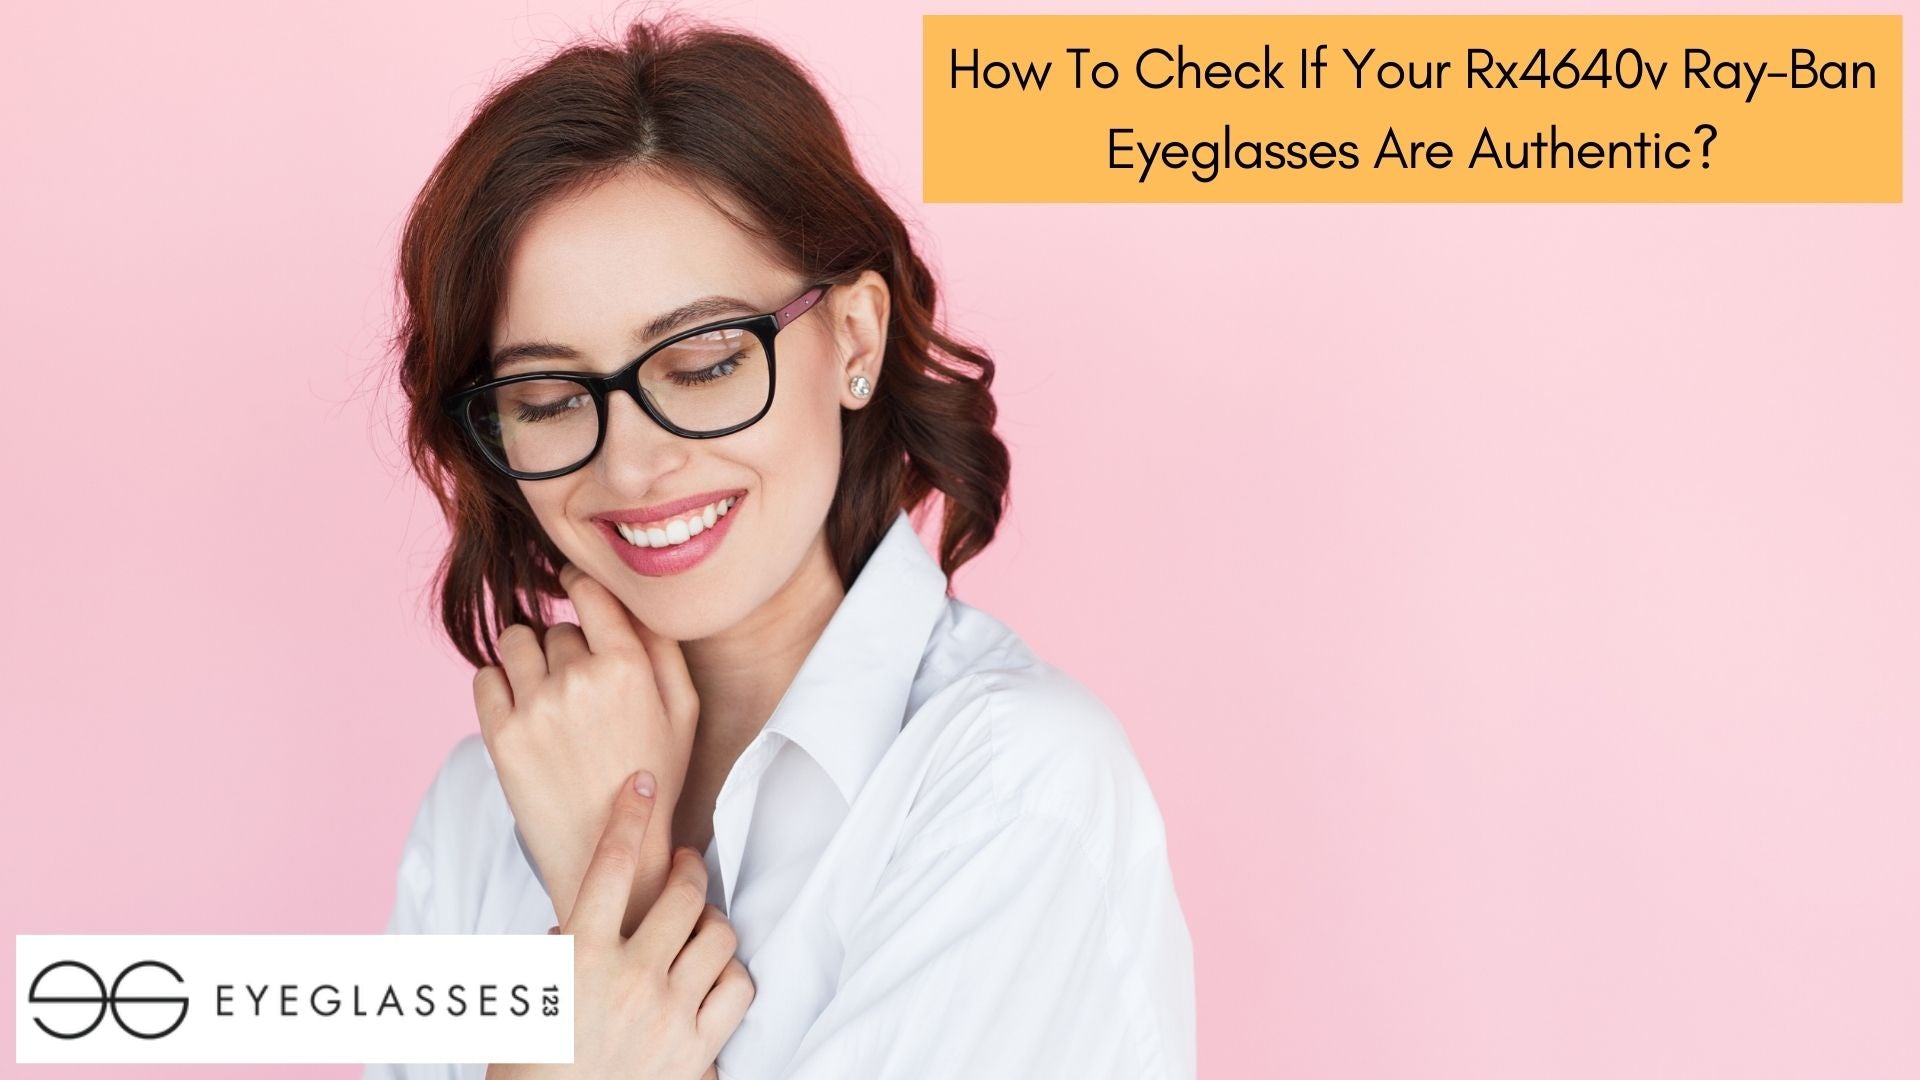 How To Check If Your Rx4640v Ray-Ban Eyeglasses Are Authentic?